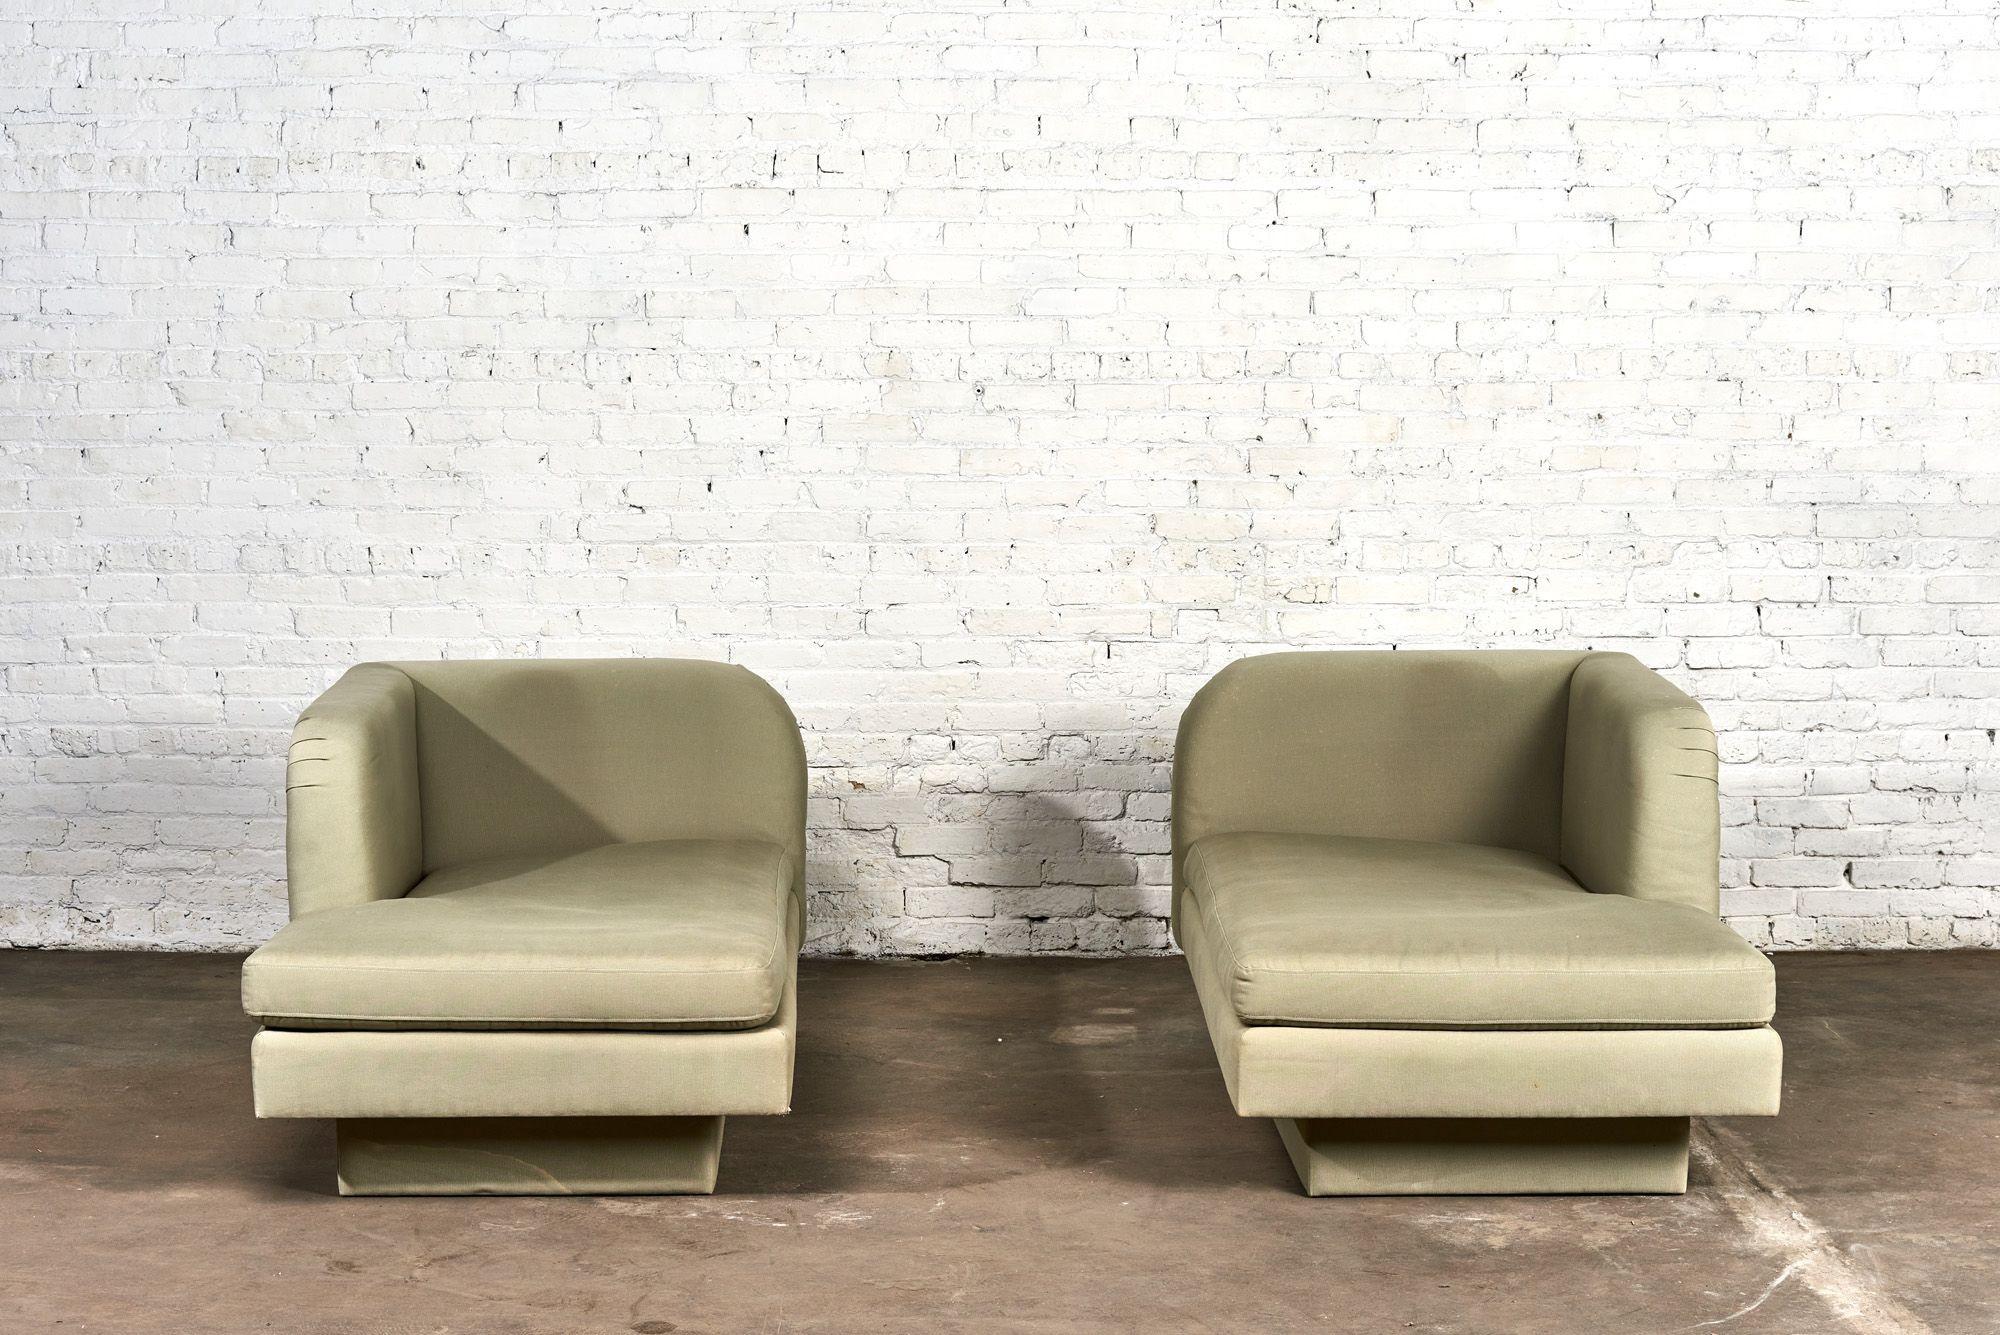 Pair left arm and right arm chaise lounges, 1980. Original upholstery, shows signs of use and minor wear and spots.